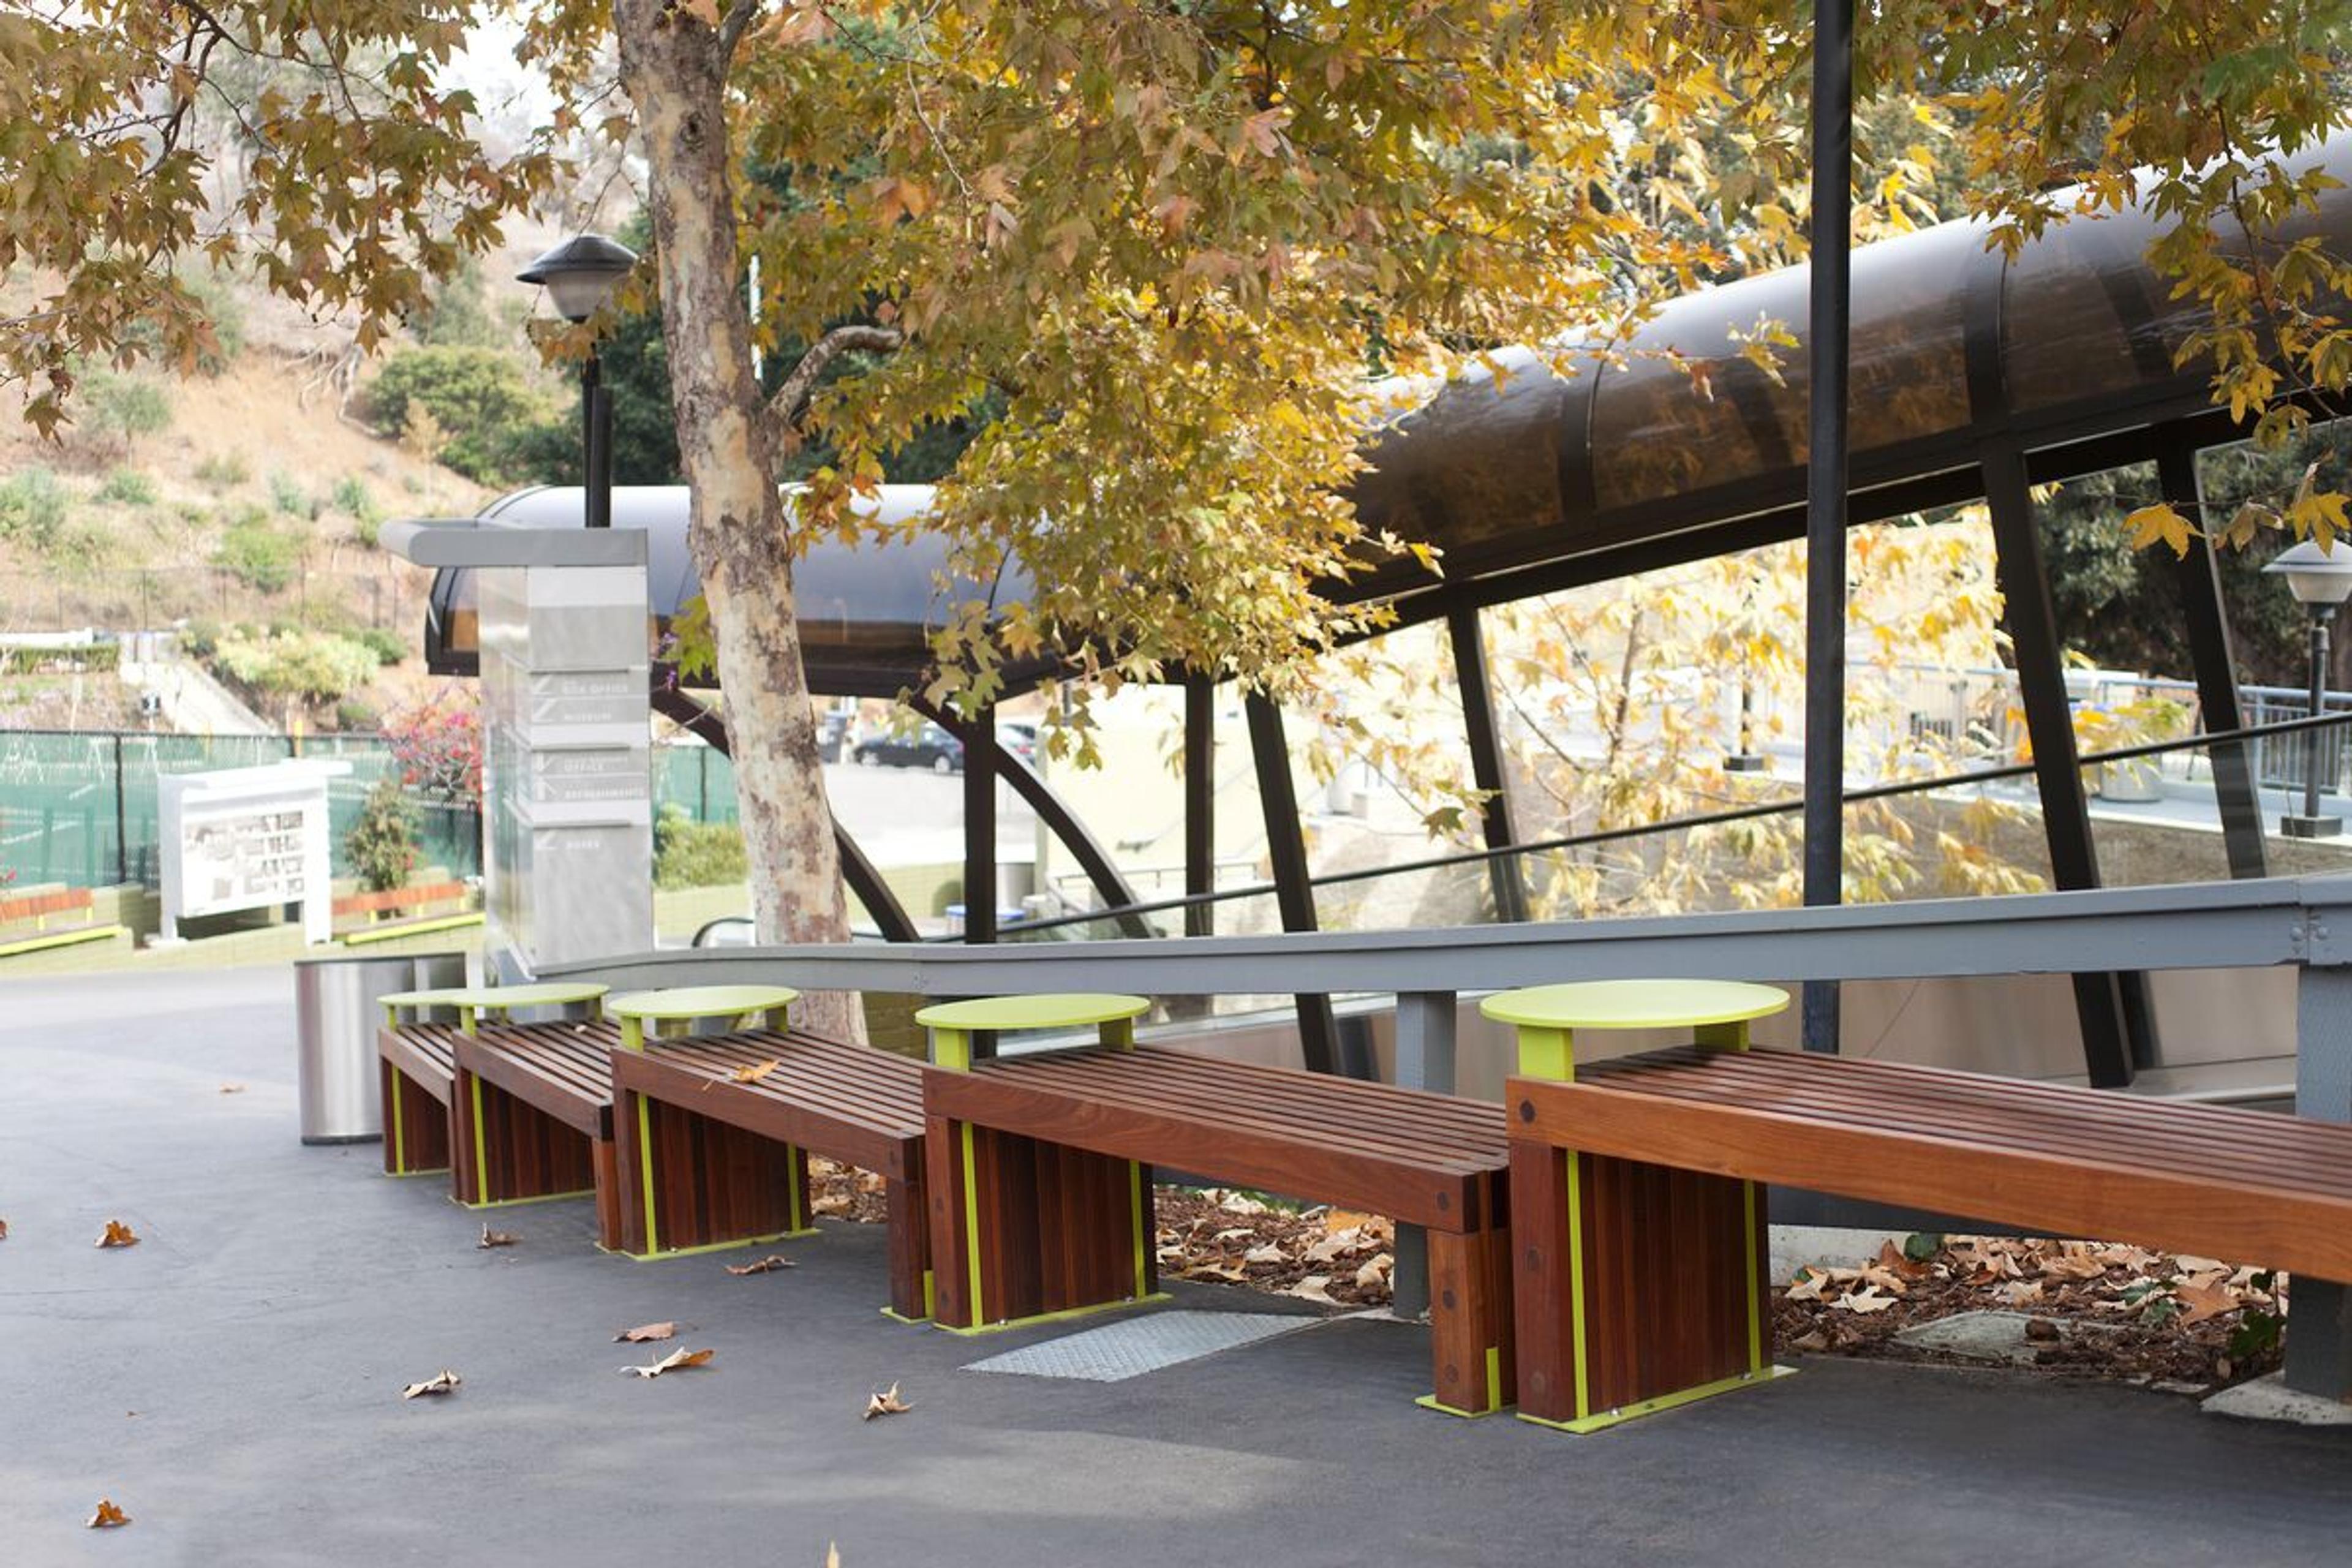 Custom seating with built-in tables • FSC® 100% Ipe hardwood bench slats • Corrosion-resistant powdercoated aluminum • Designed to parallel the slope of the Hollywood Bowl • Los Angeles, California